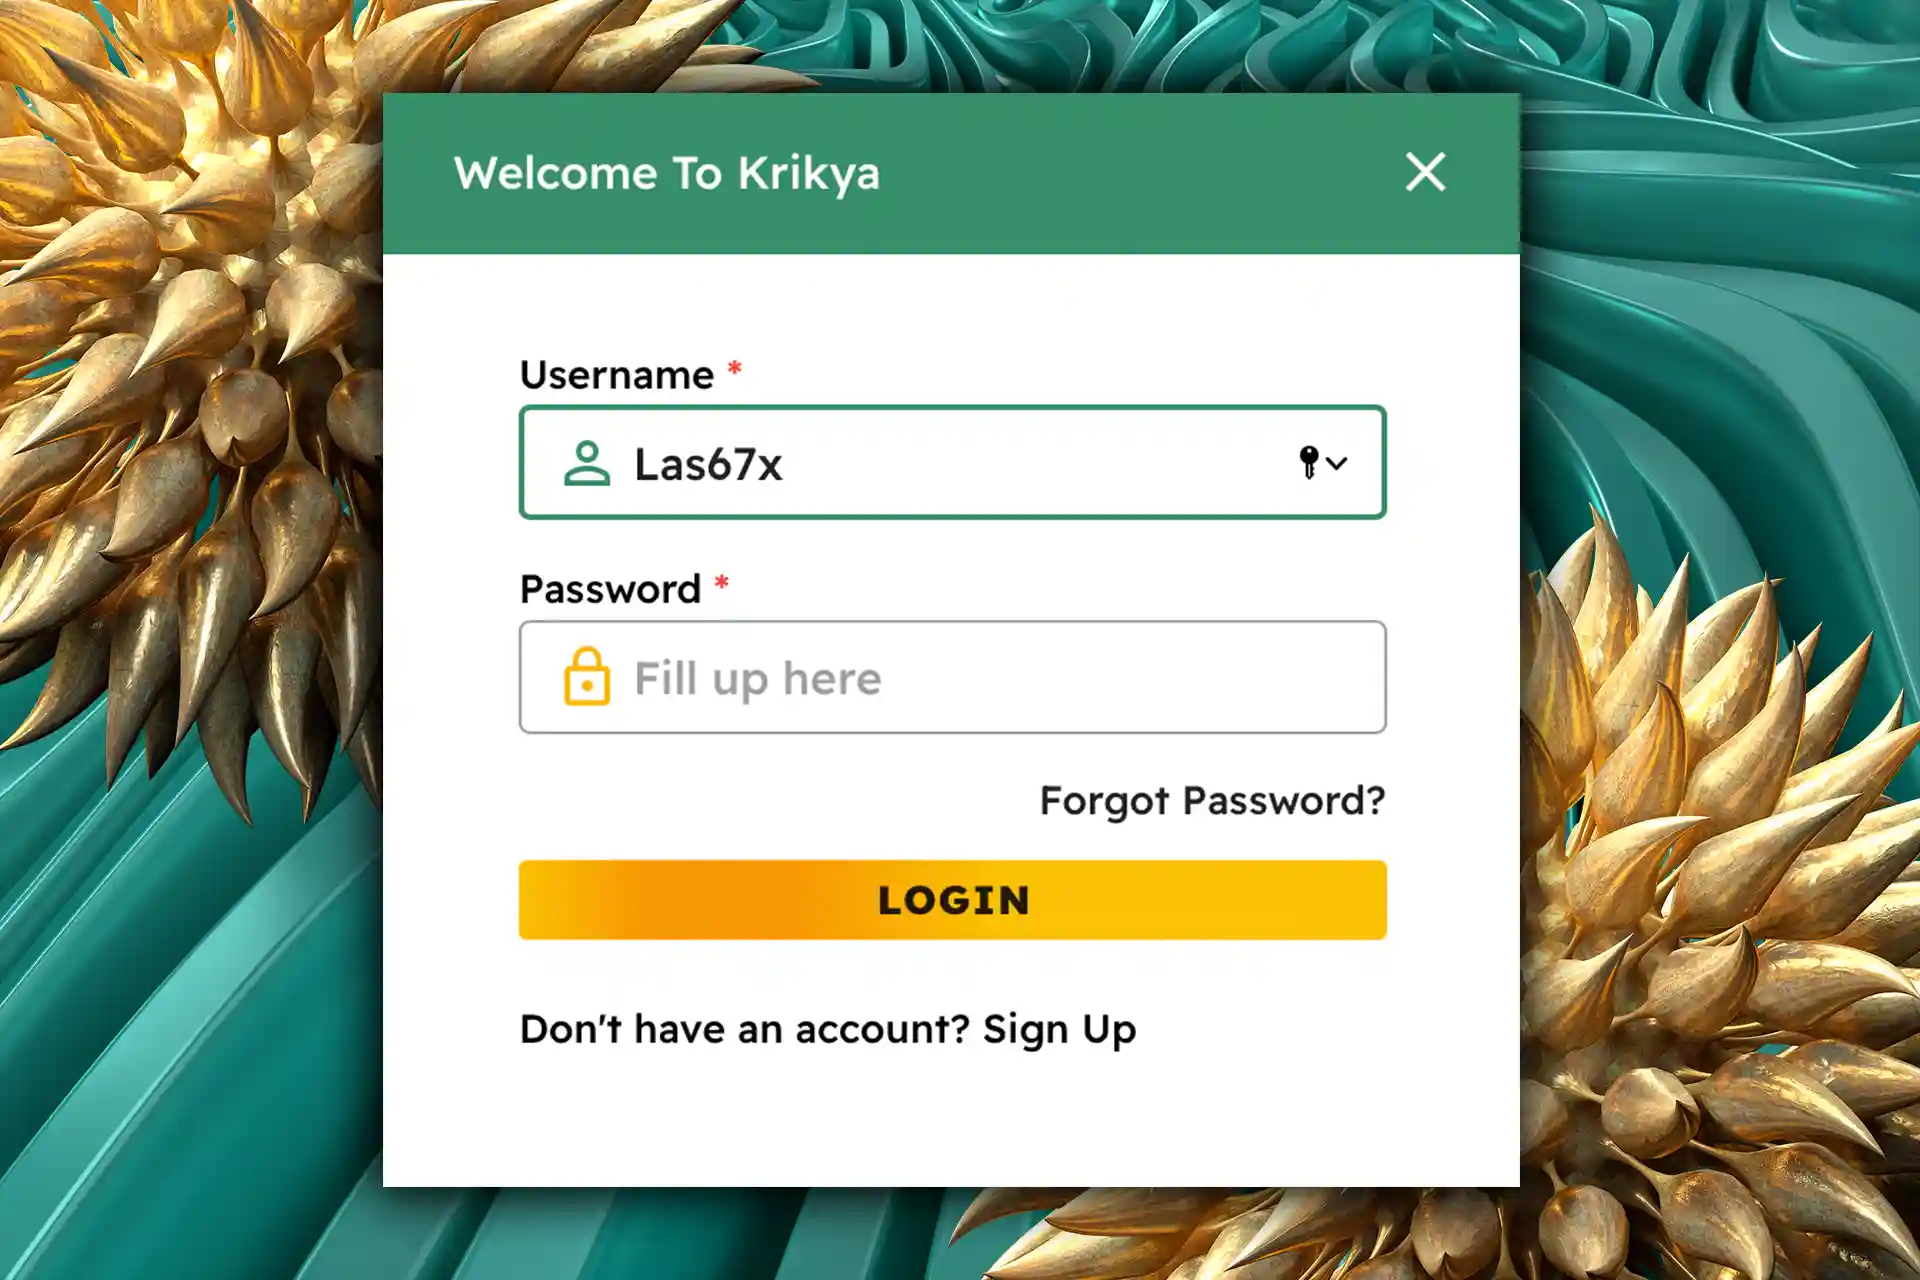 Use your username and password to log in to the Krikya account.